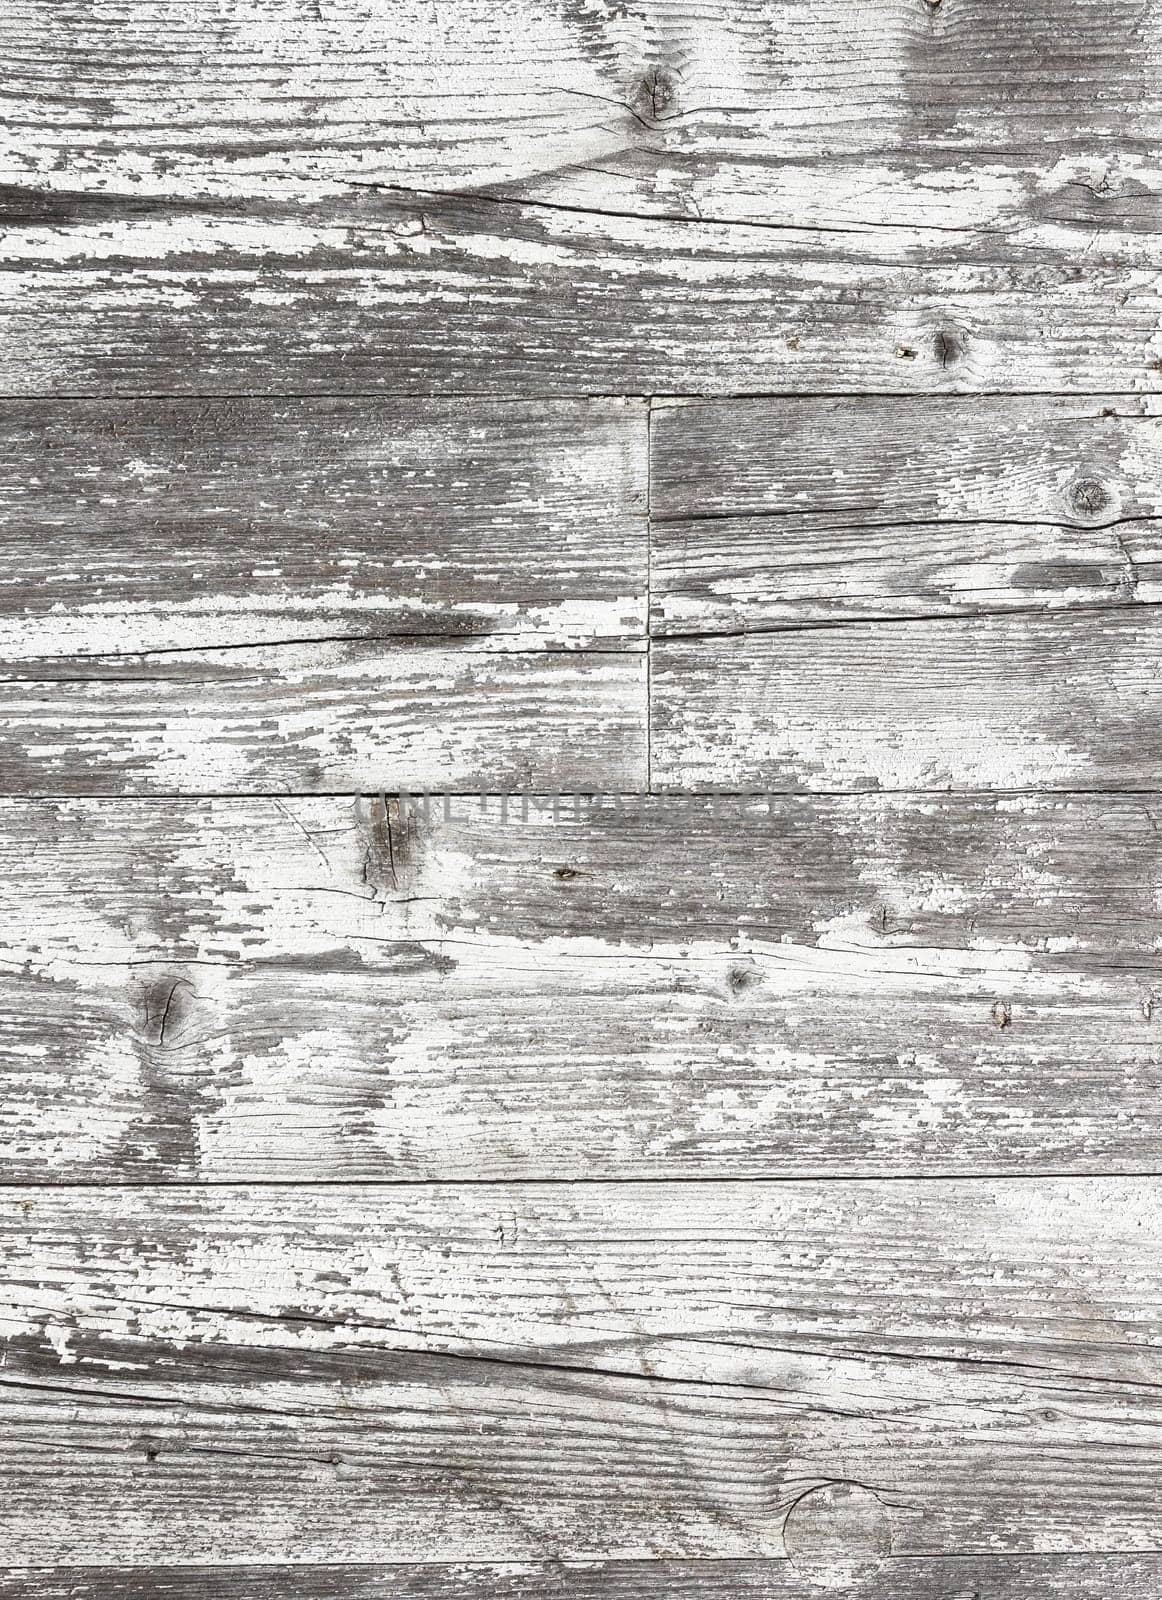 Planks of rustic wood with light brown tones